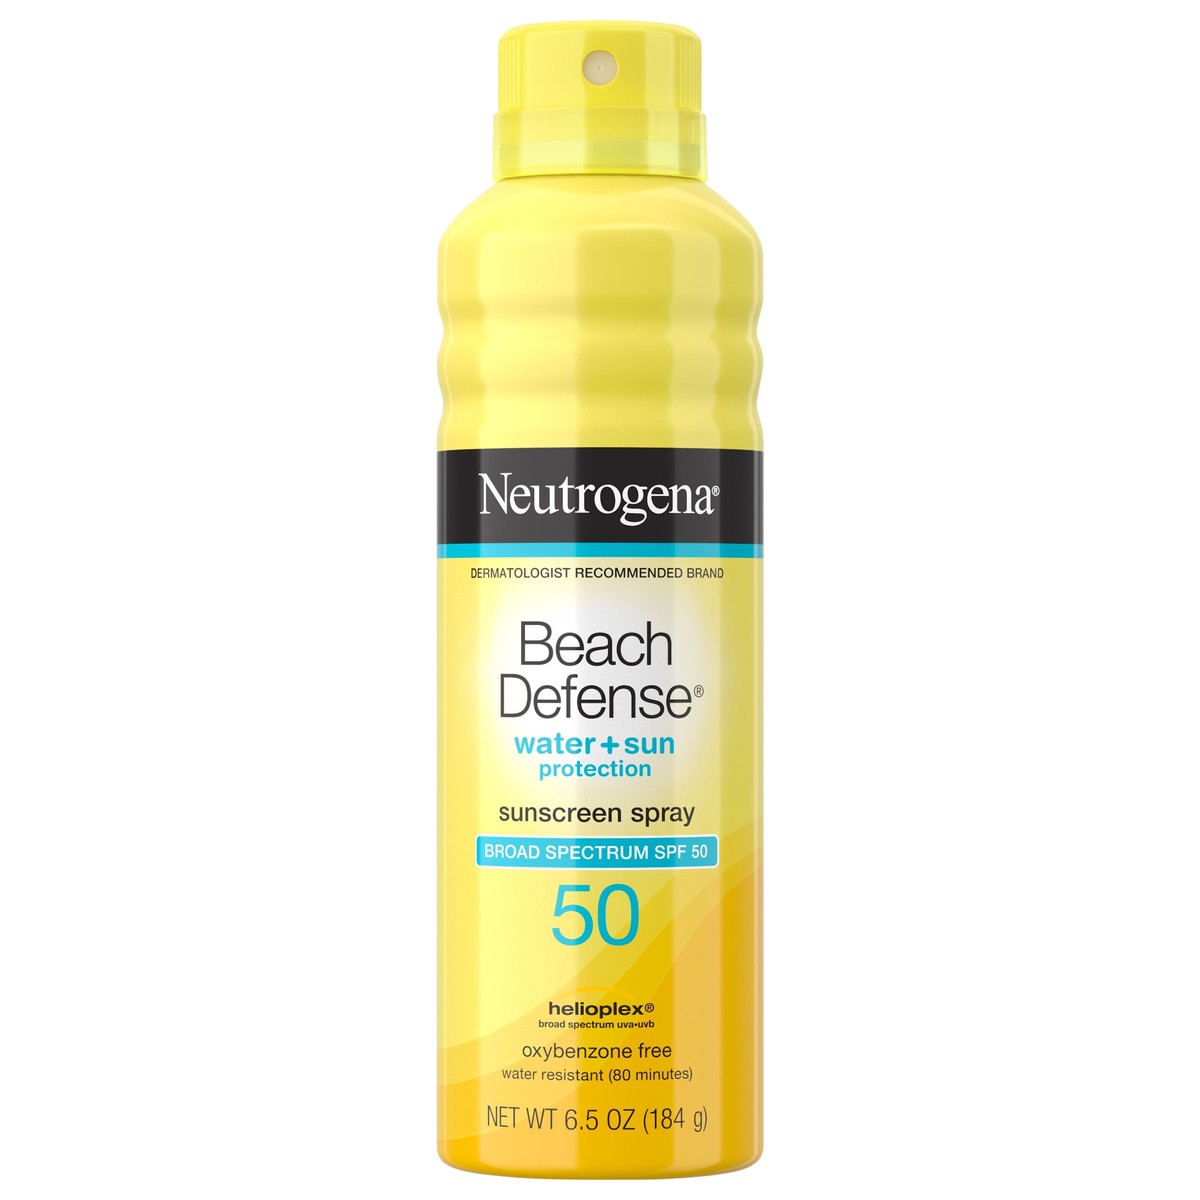 slide 1 of 5, Neutrogena Beach Defense Sunscreen Spray SPF 30 Water-Resistant Sunscreen Body Spray with Broad Spectrum SPF 50, PABA-Free, Oxybenzone-Free & Fast-Drying, Superior Sun Protection, 6.5 oz, 6.5 oz